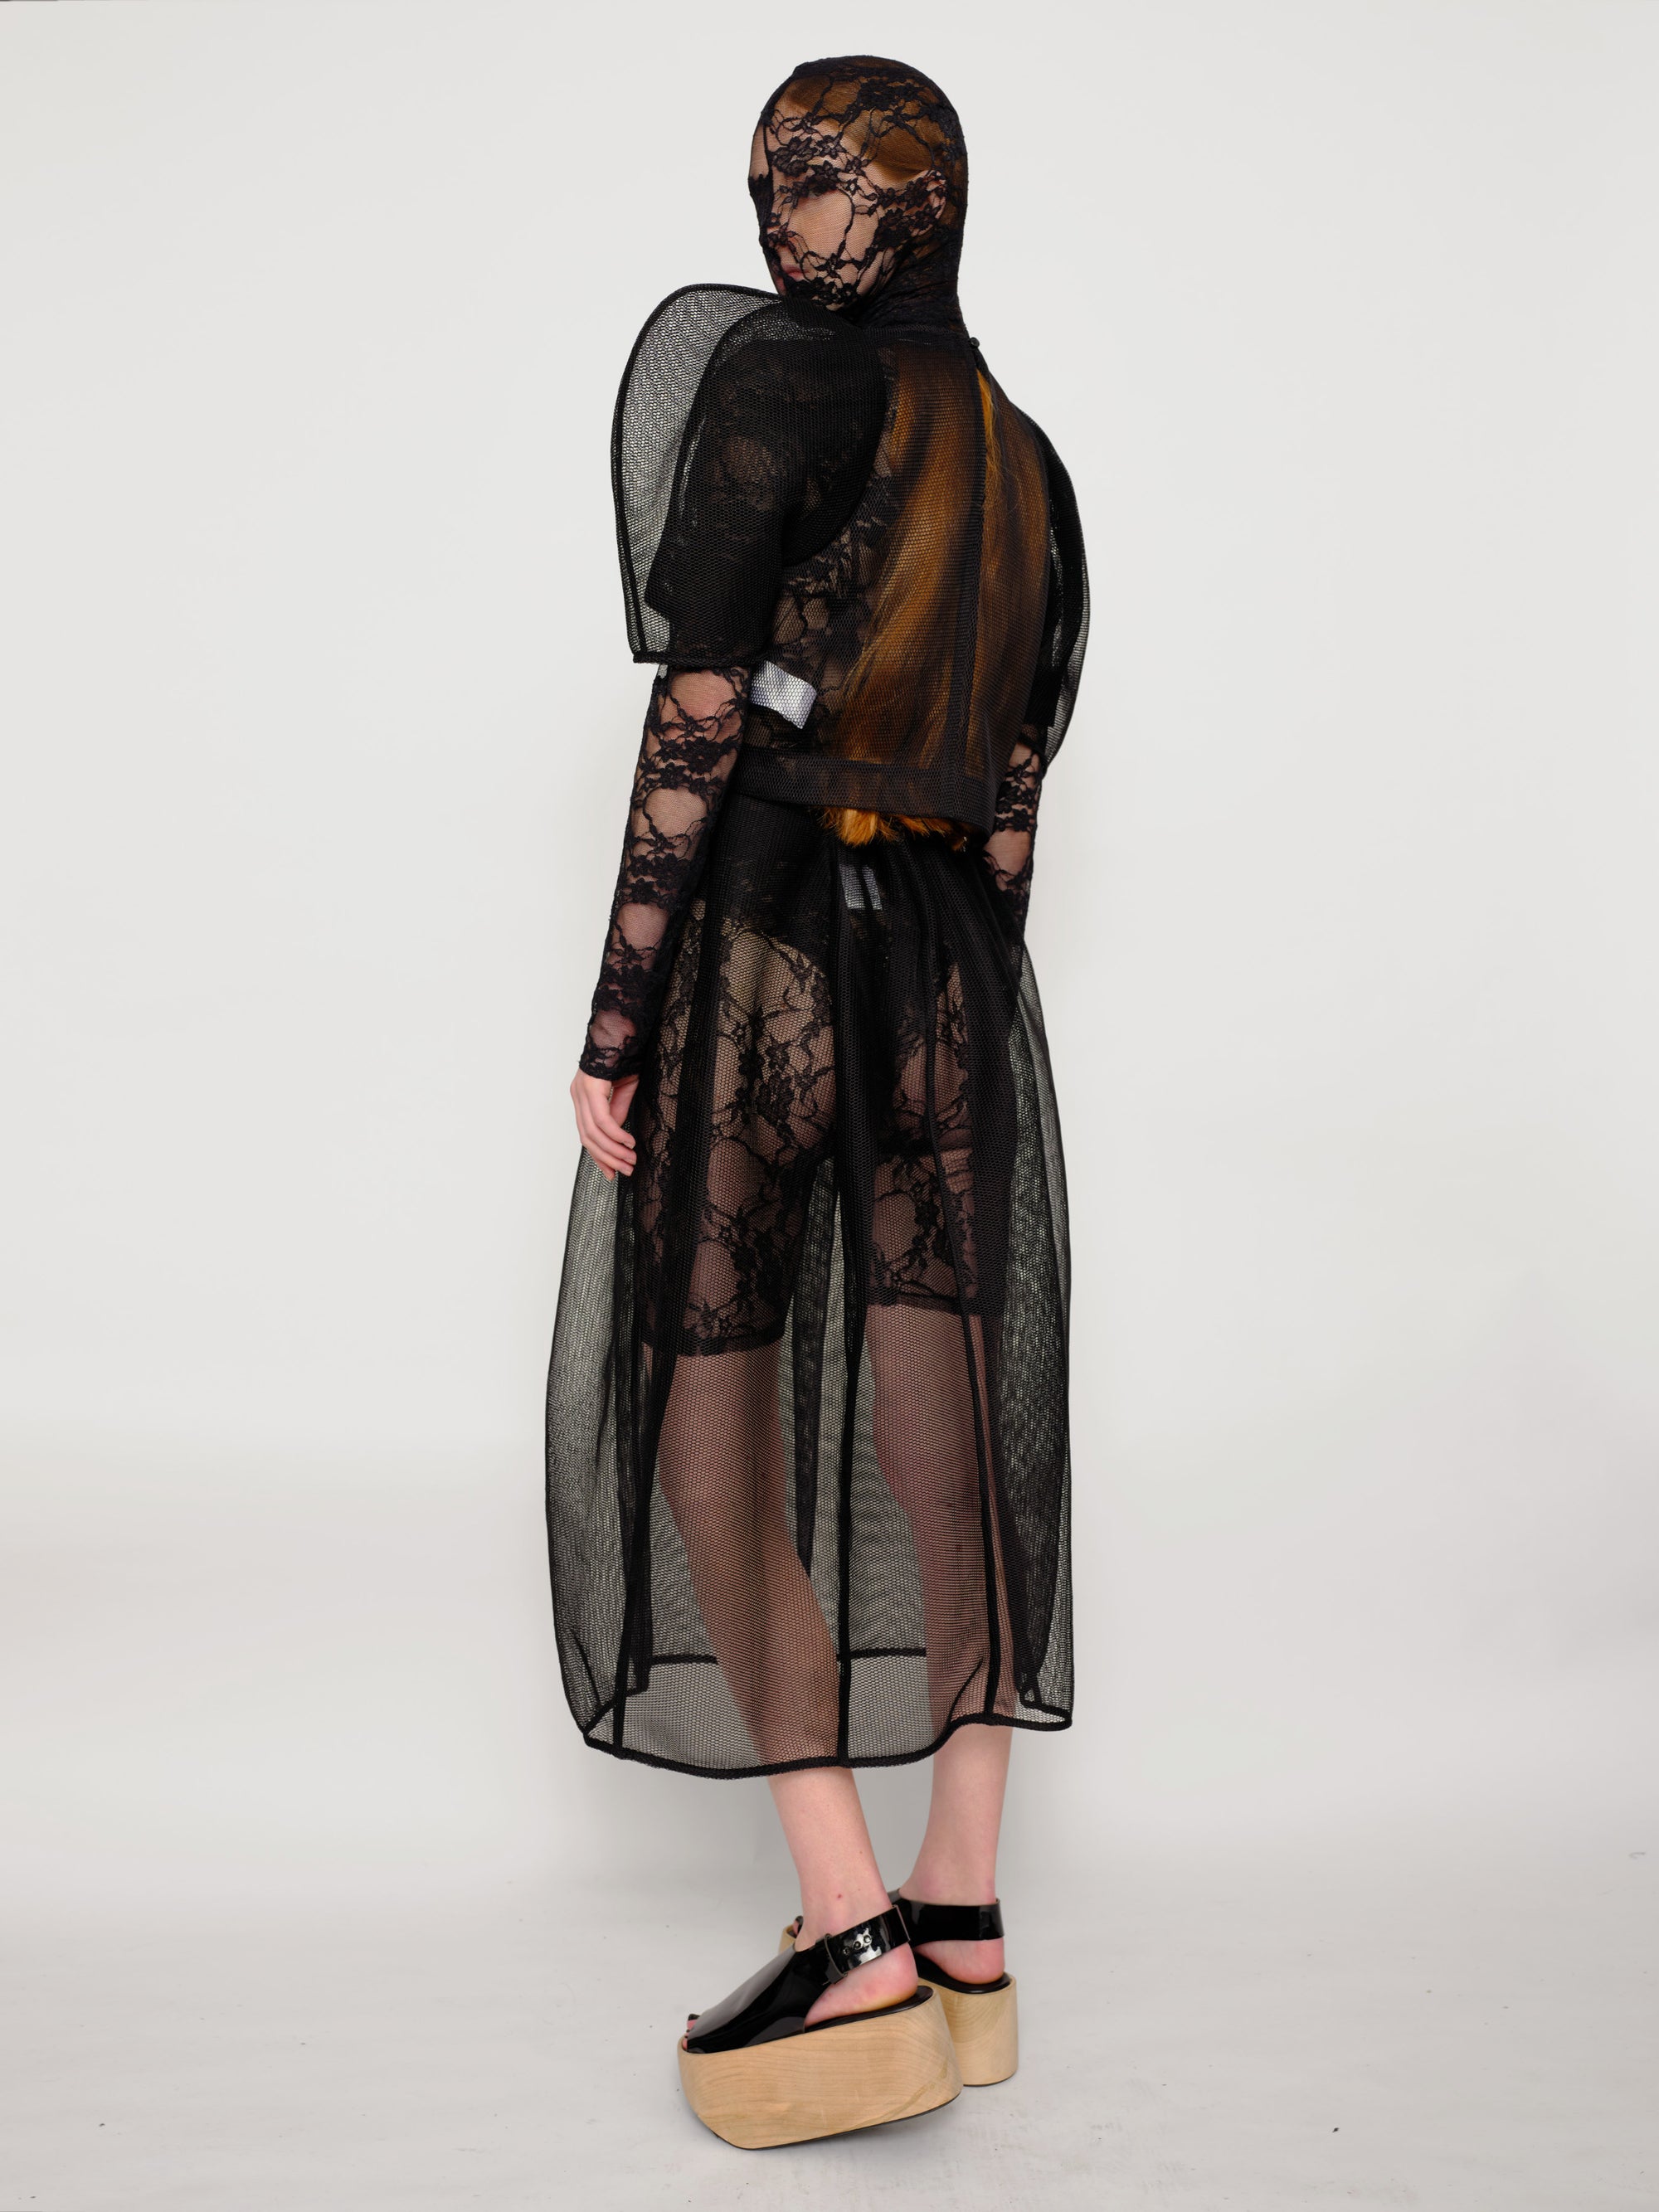 back-angle-of-a-Woman-standing-against-white-background-wearing-Melitta-Baumeister's-black-head-covering-under-layer-covered-by-sheer-lace-dress-with-mesh-fabric-and-puffed-shoulders-and-wearing-platform-sandals